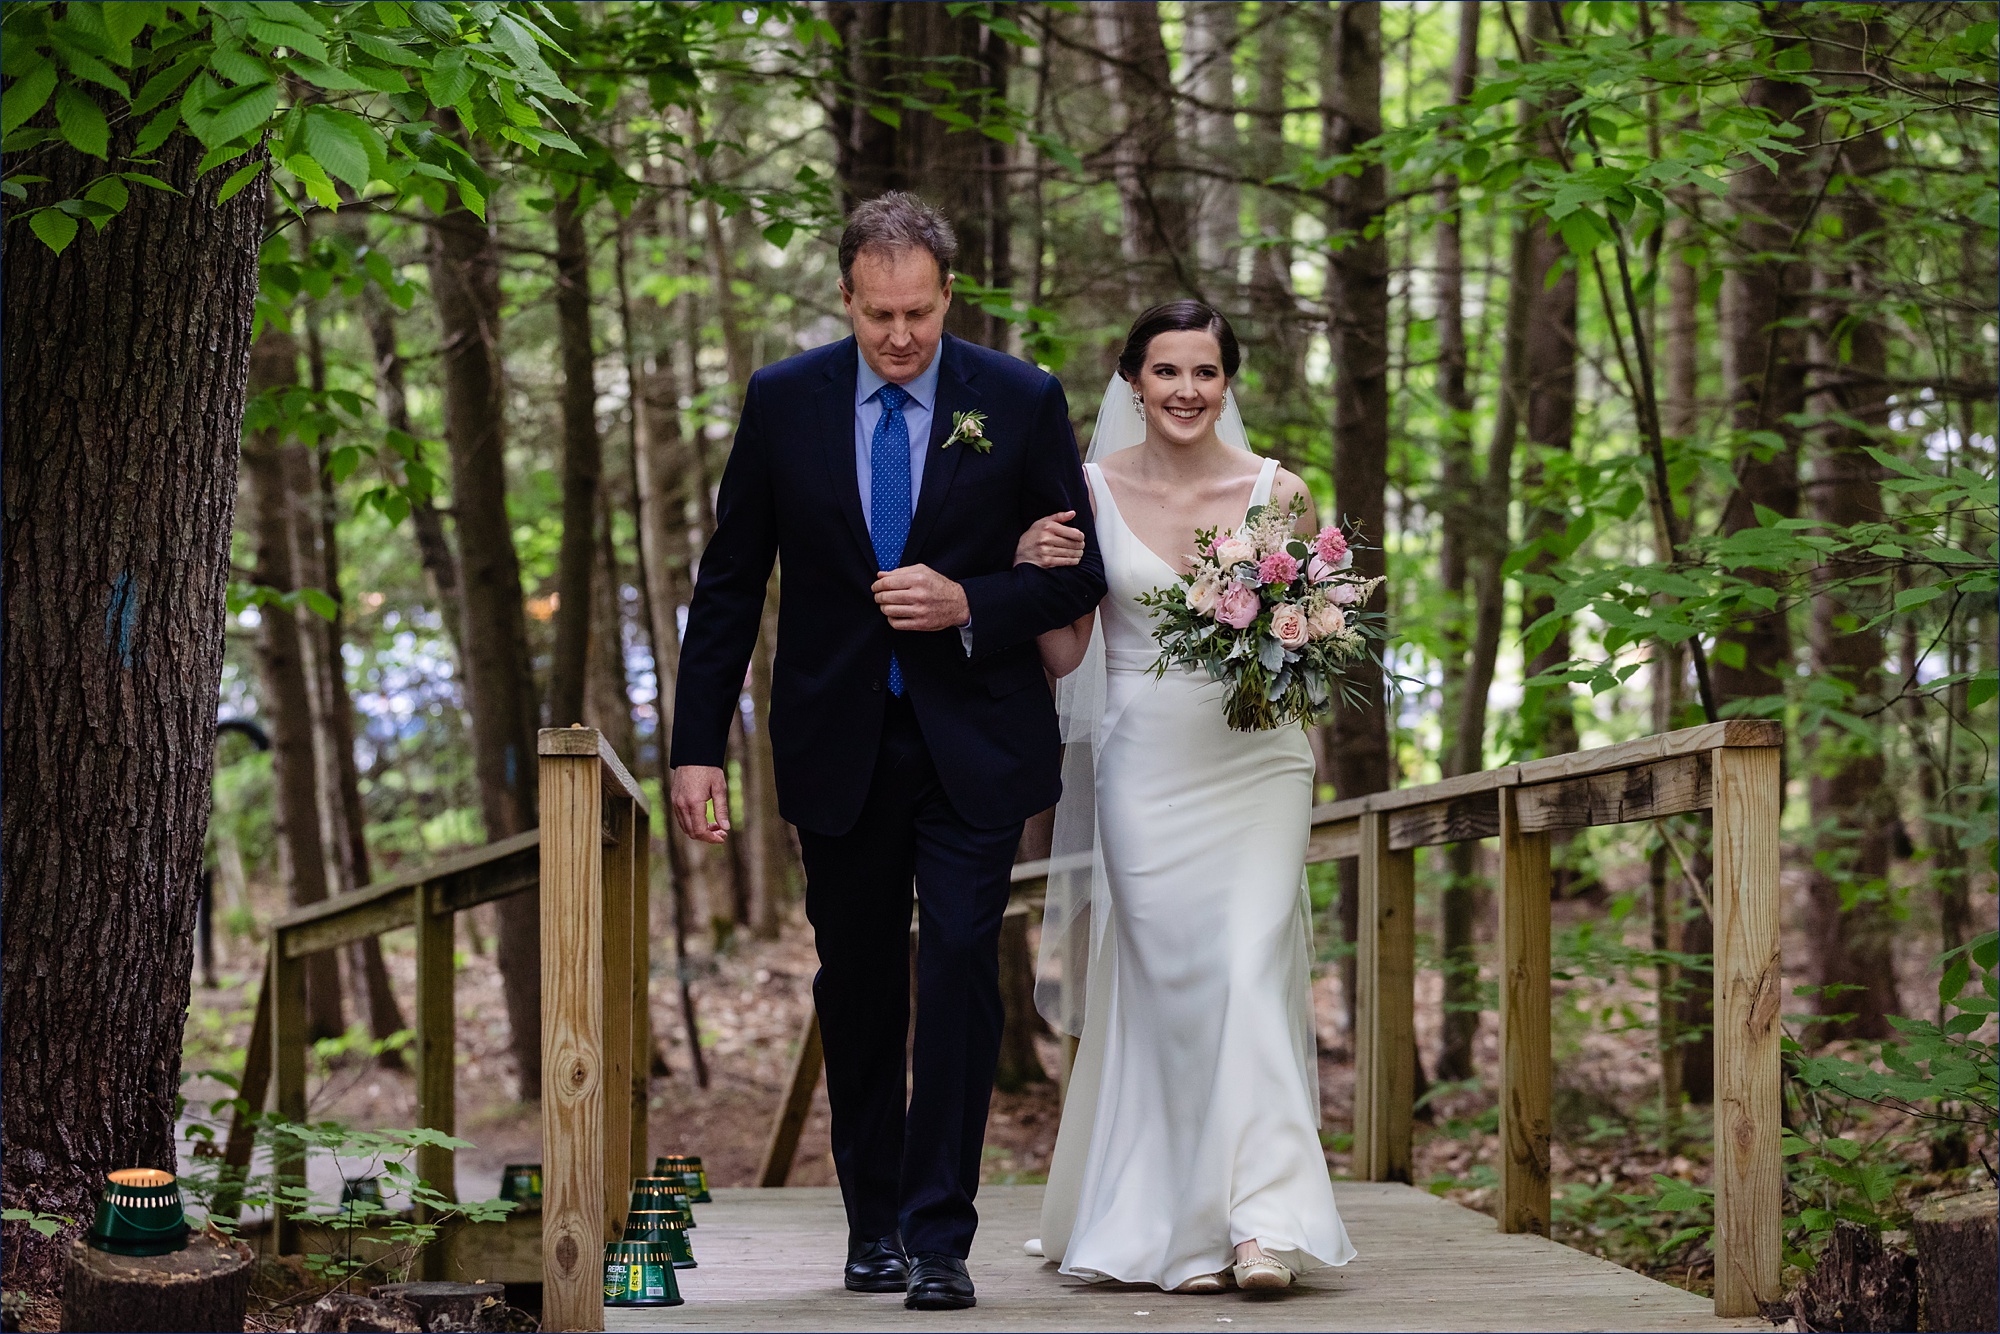 The bride comes down the aisle with her father at her wooded wedding ceremony